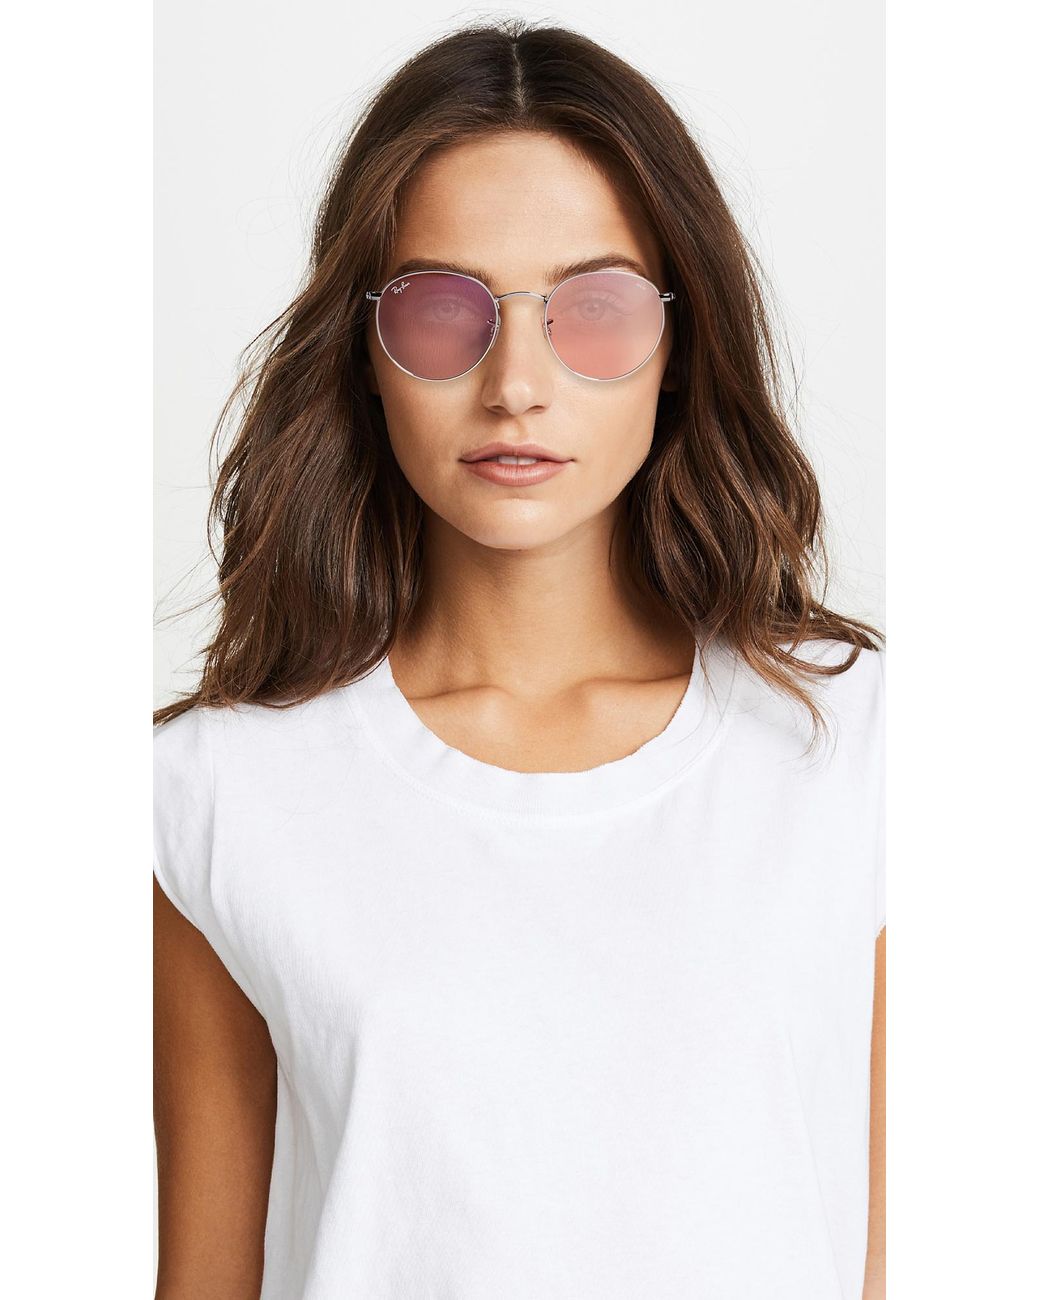 Rb3447 Round Metal Evolve Sunglasses in Pink Lyst